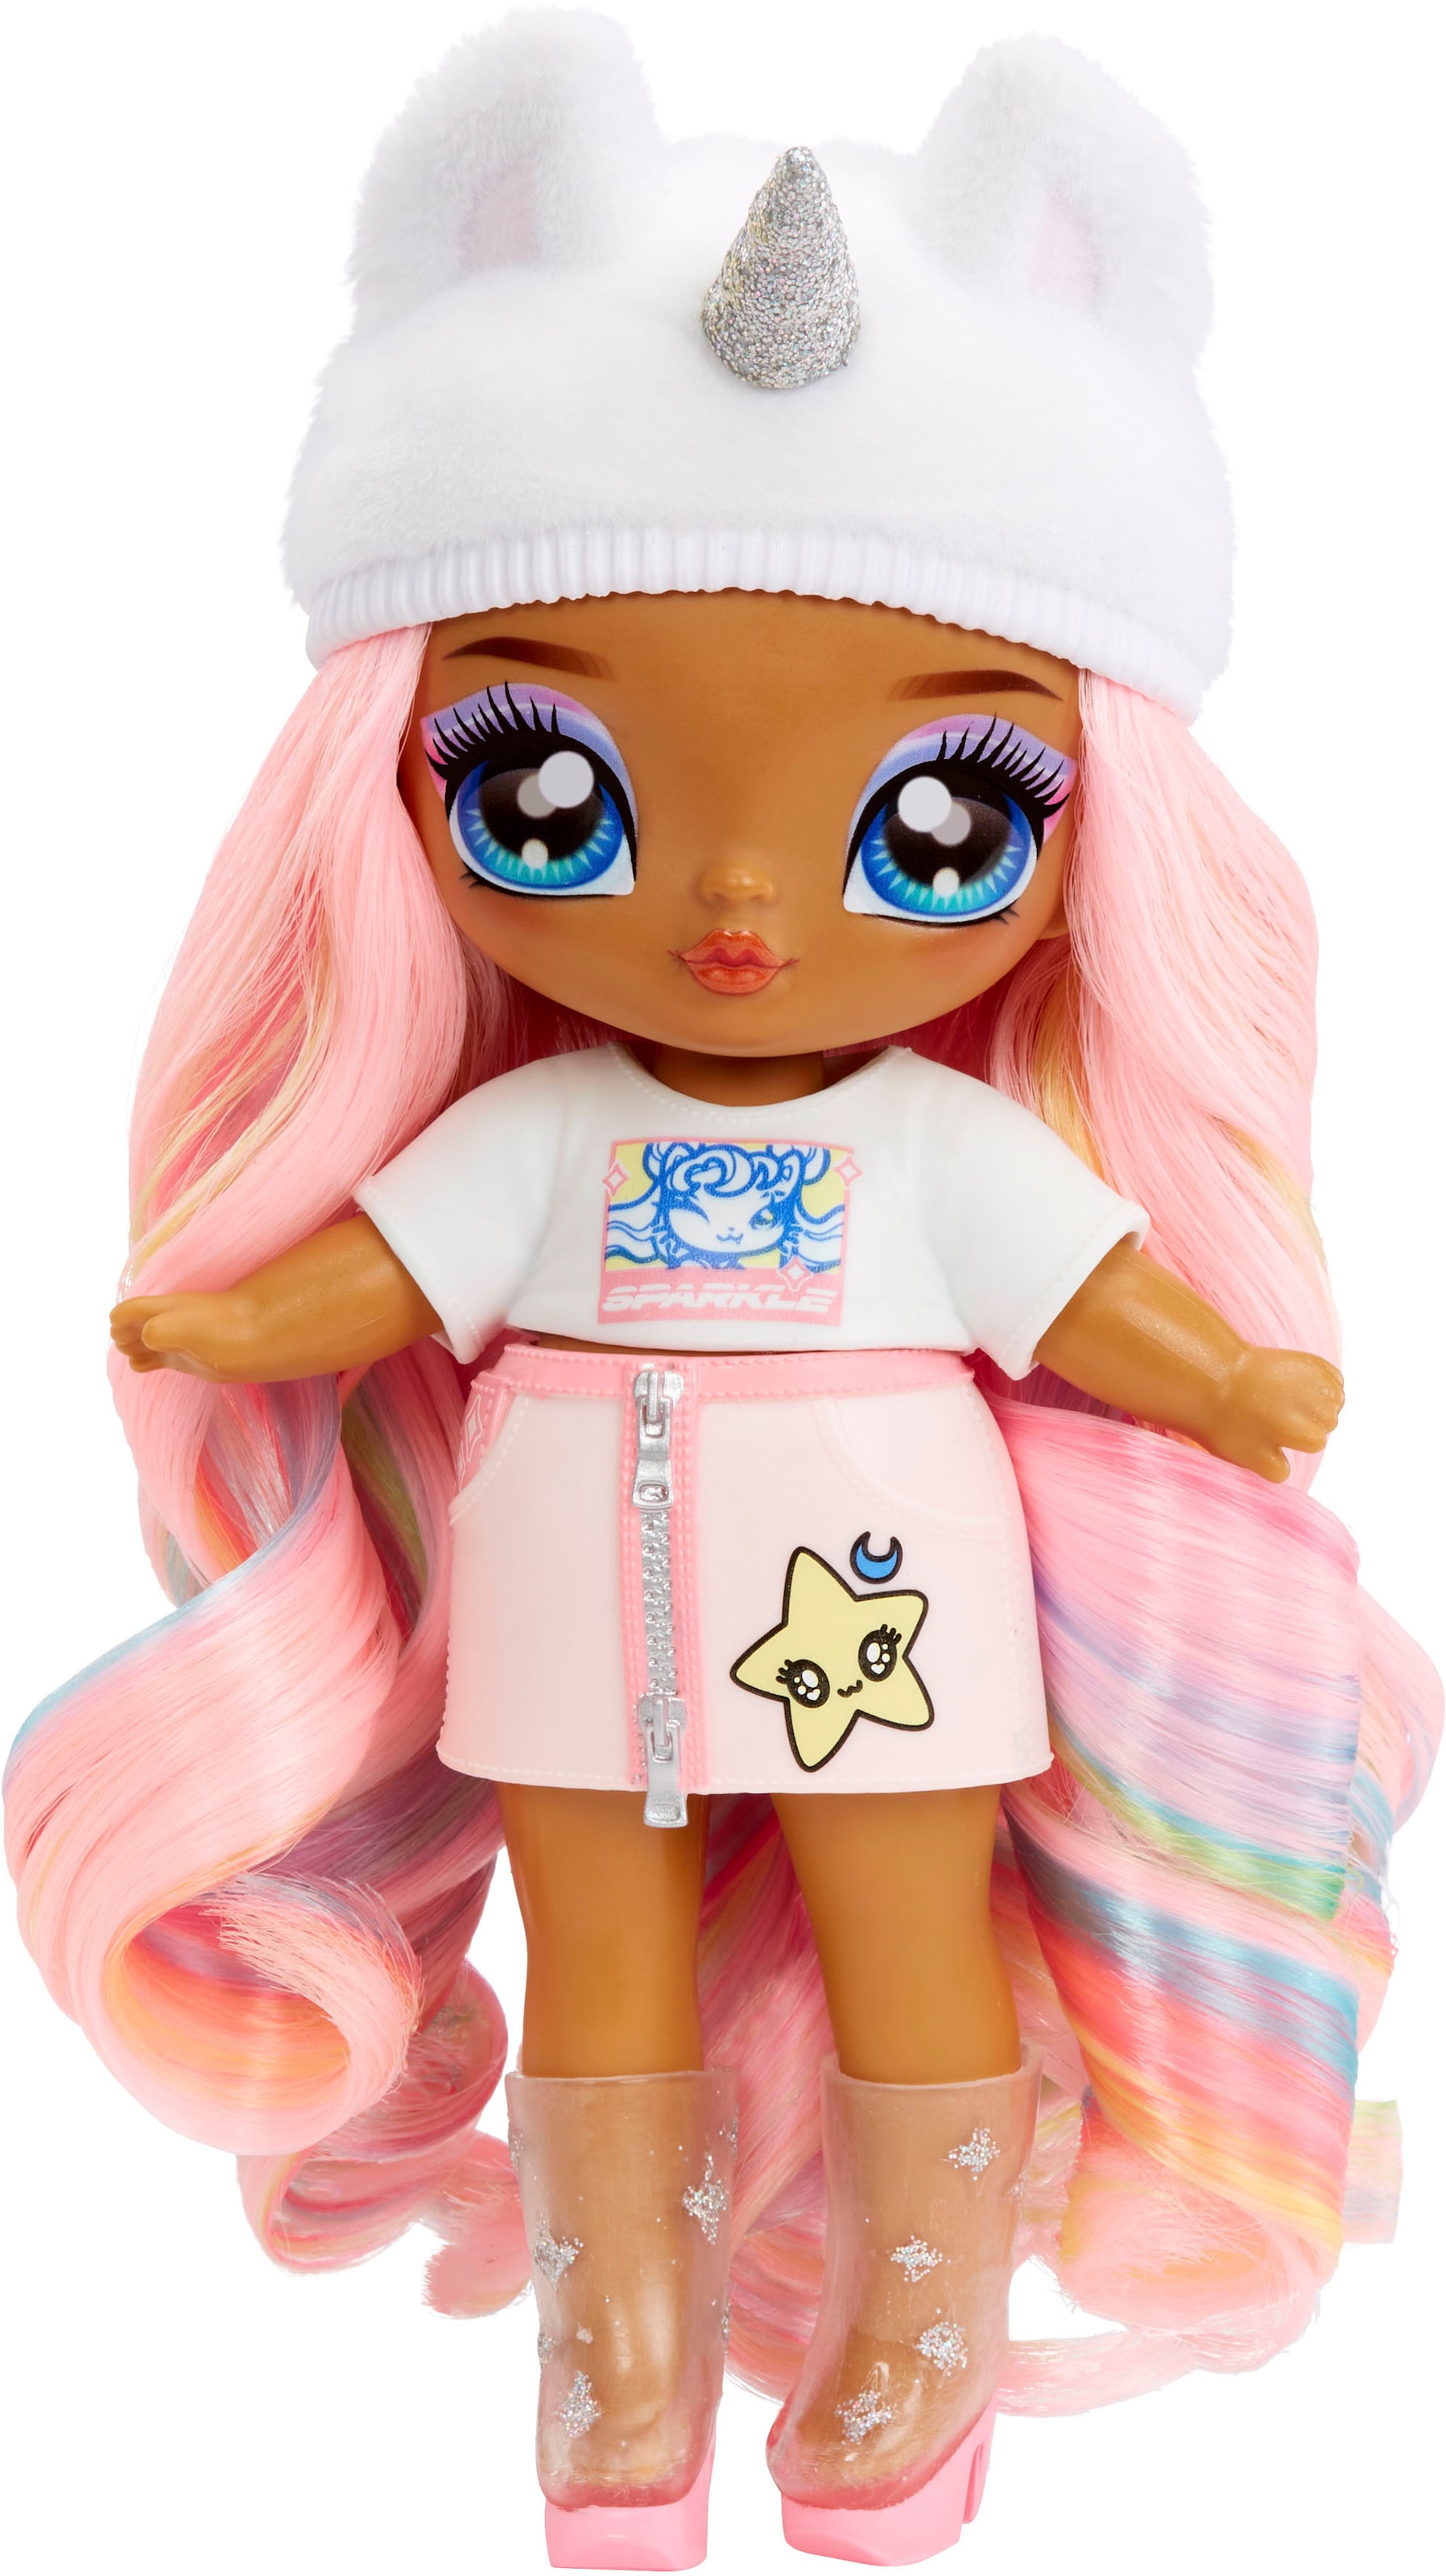 MGA ENTERTAINMENT Puppenmöbel »3in1 Backpack Bedroom Unicorn - Whitney Sparkles«, Na! Na! Na! Surprise